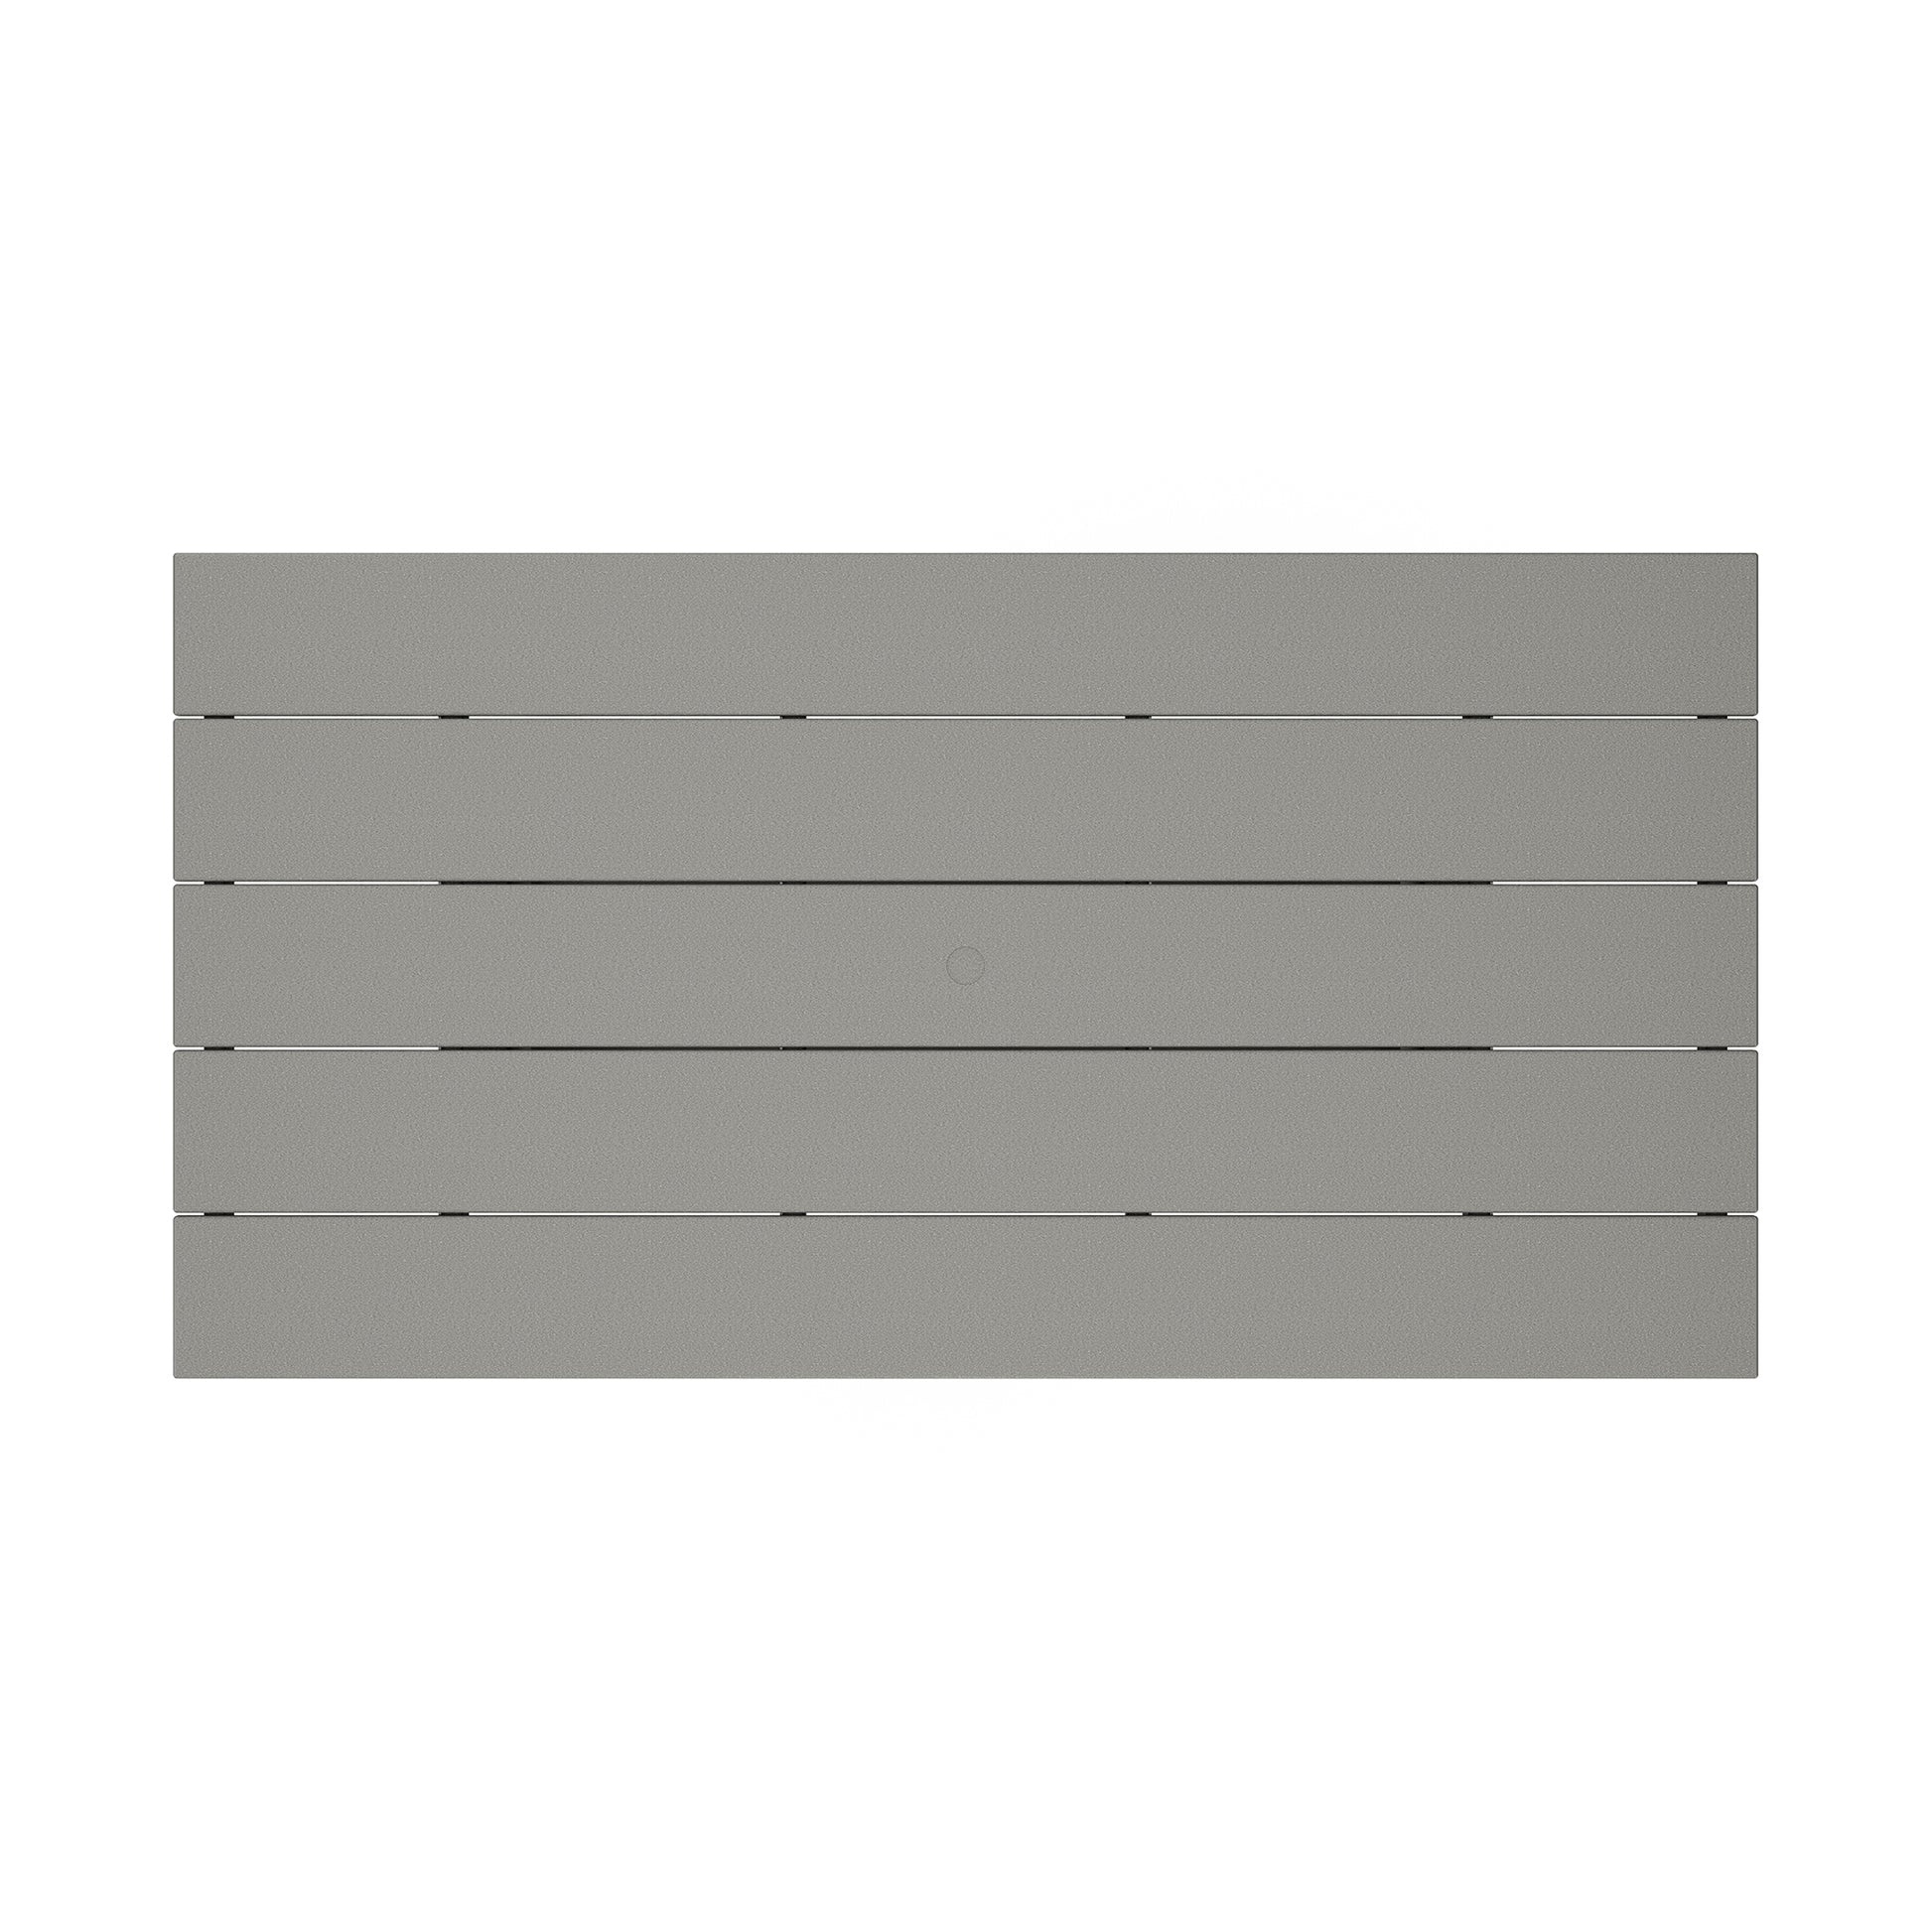 A gray horizontal panel with six uniformly spaced POLYWOOD Farmhouse Trestle 37" x 72" planks connected by rivets and a central circular outlet.